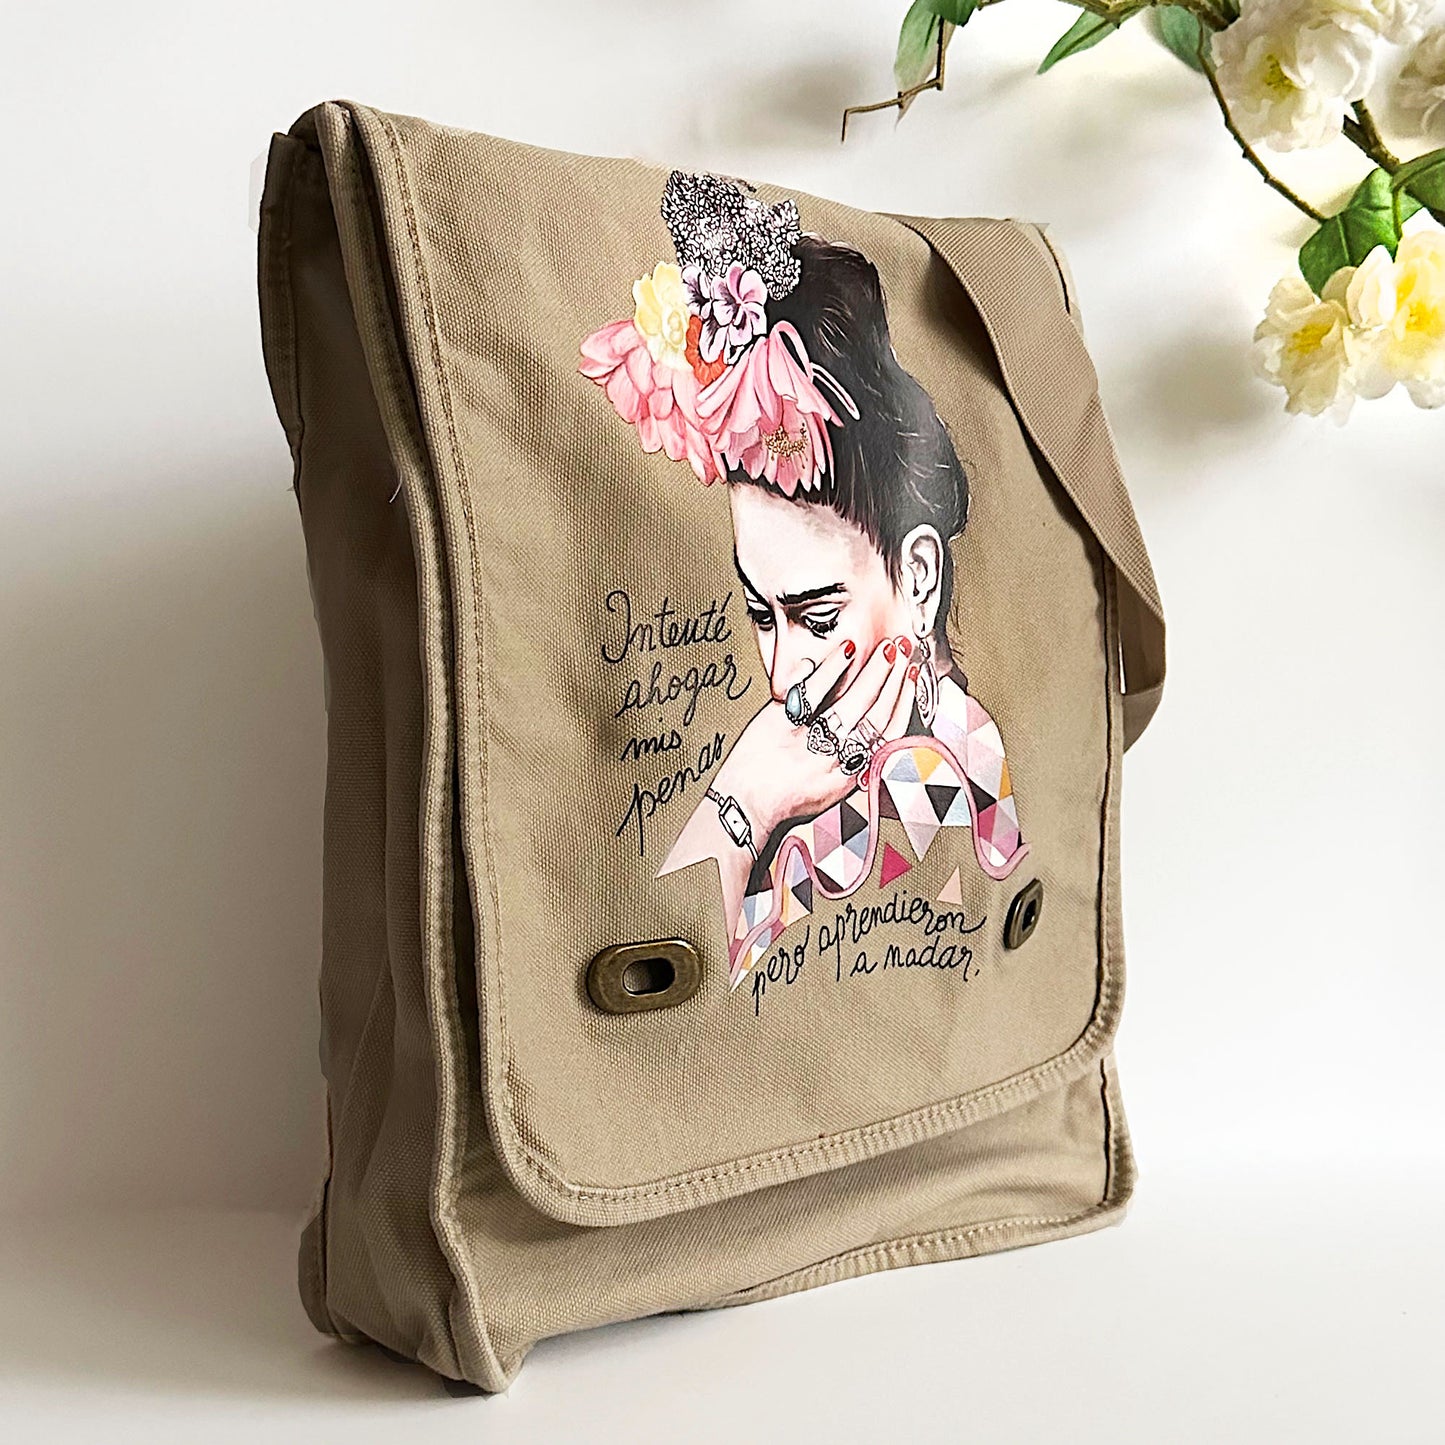 Frida Kahlo Bag: Shoulder or crossbody field bag, khaki color dyed washed soft cotton canvas fabric. Adjustable strap. Mexixcan artist floral illustration front sticker. Women and girls fashion accessory by Fridamaniacs